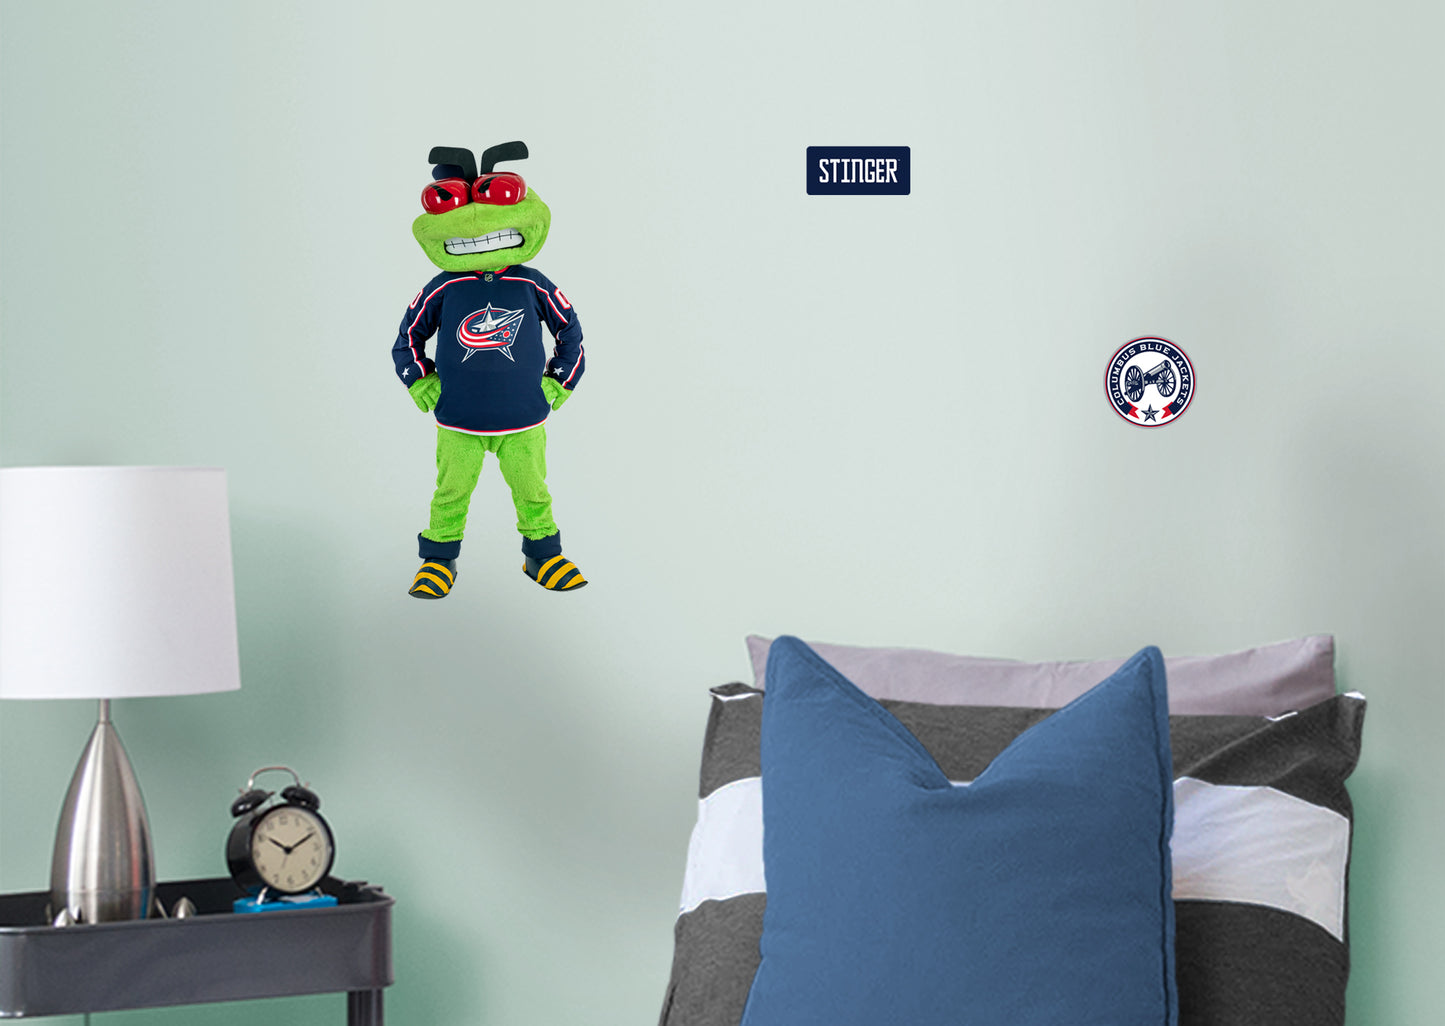 Columbus Blue Jackets: Stinger  Mascot        - Officially Licensed NHL Removable Wall   Adhesive Decal